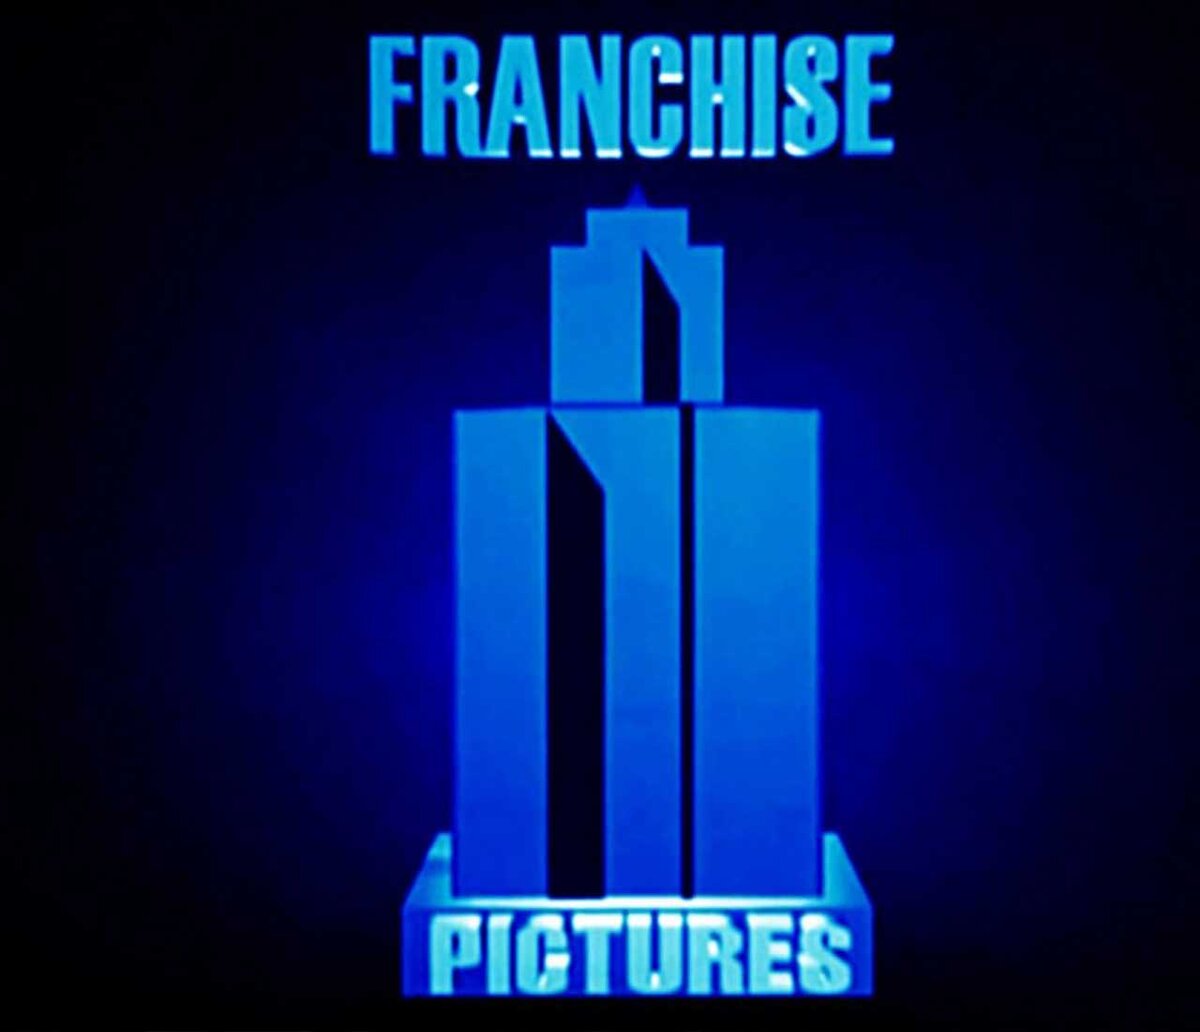 Pictures mp3. LPL franchise. Franchise pictures. Qiy IGIYI pictures logo.